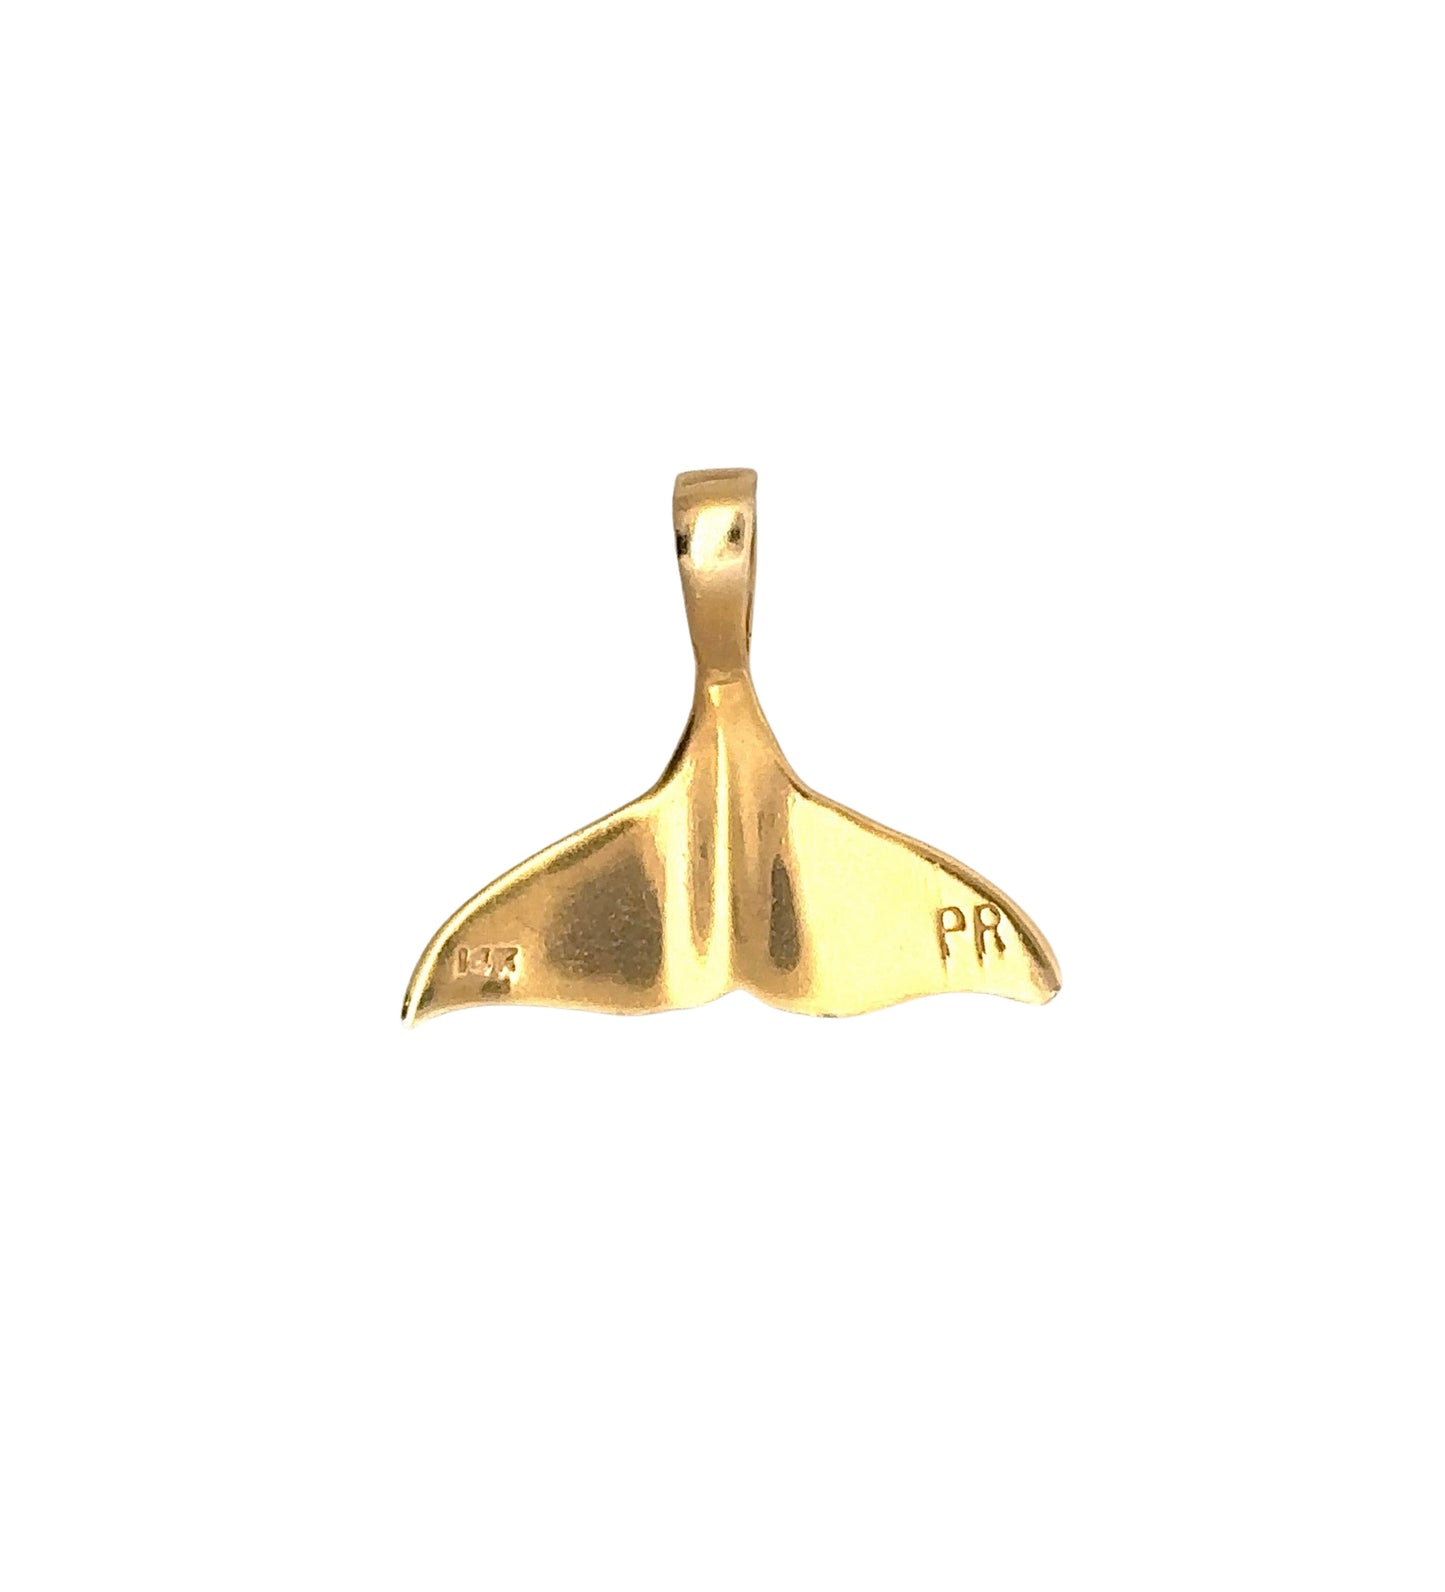 back of yellow gold whale tail pendant with "PR" + 14K stamp